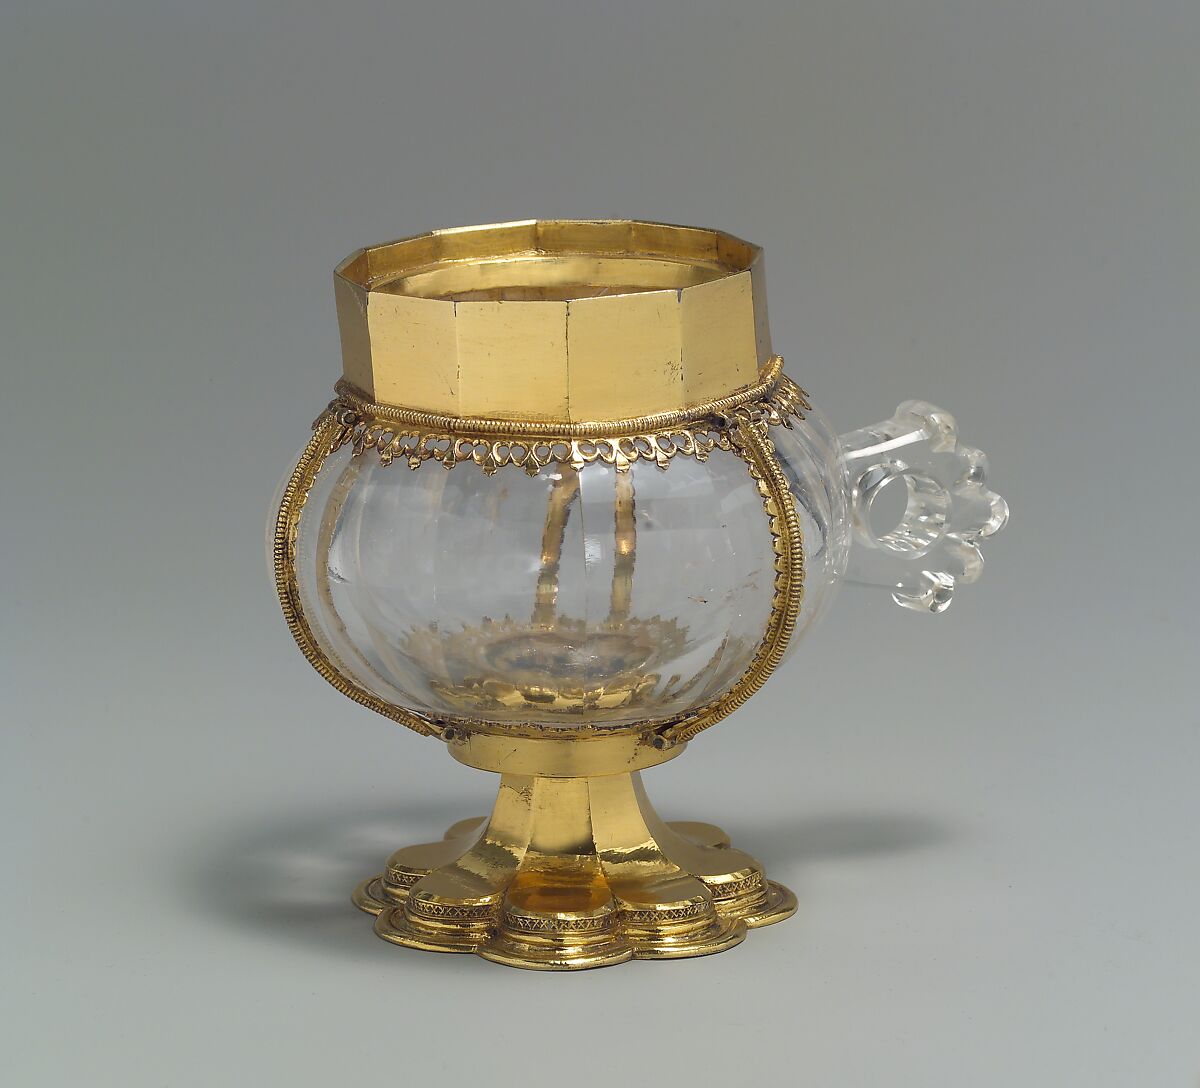 Cup with Gilded-Silver Mounts, Rock crystal, silver, silver-gilt, enamel?, French or Italian 